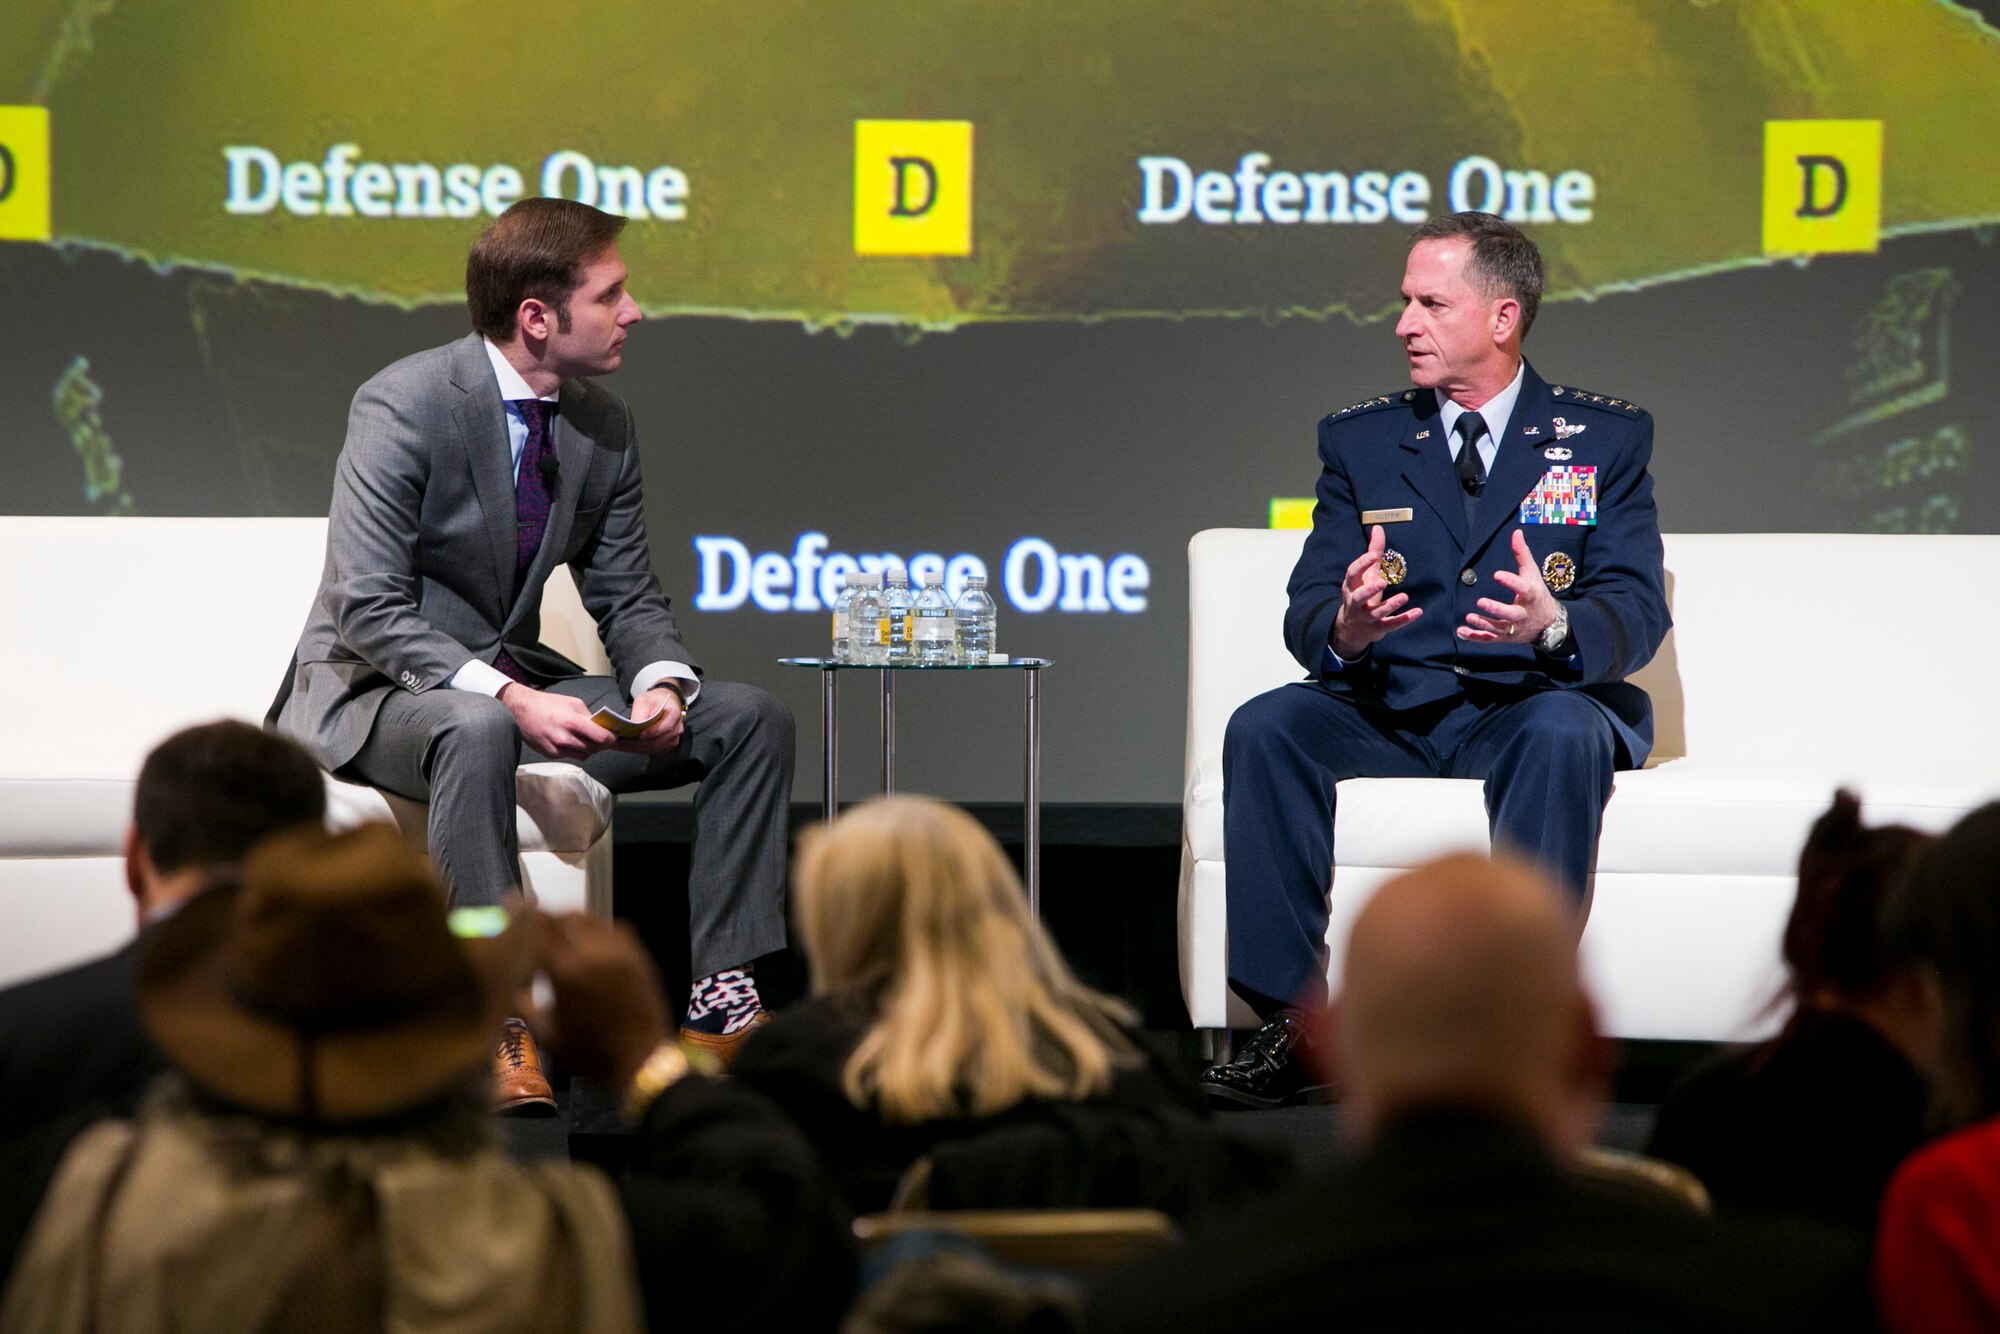 Defense One’s Marcus Weisgerber, left, speaks with Air Force Chief of Staff Gen. David L. Goldfein about multidomain warfare at the Defense One Summit in Washington D.C., Nov. 17, 2016. (Courtesy photo)